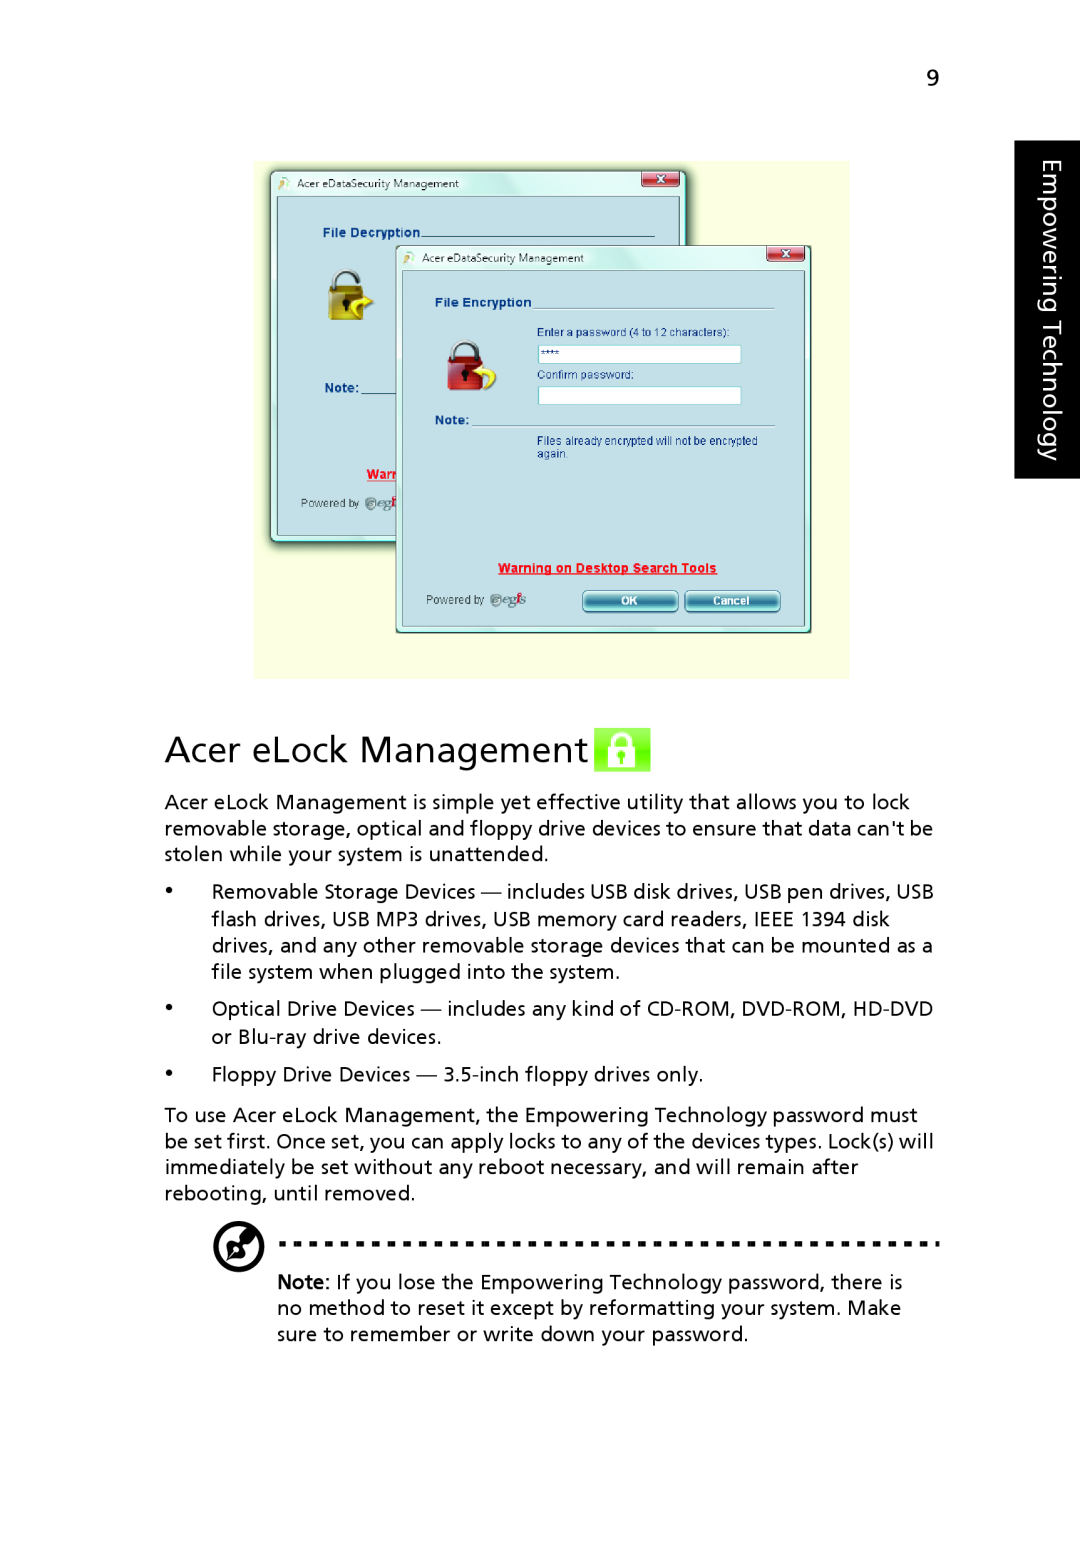 Acer MS2219, 4920 manual Acer eLock Management, Empowering Technology 